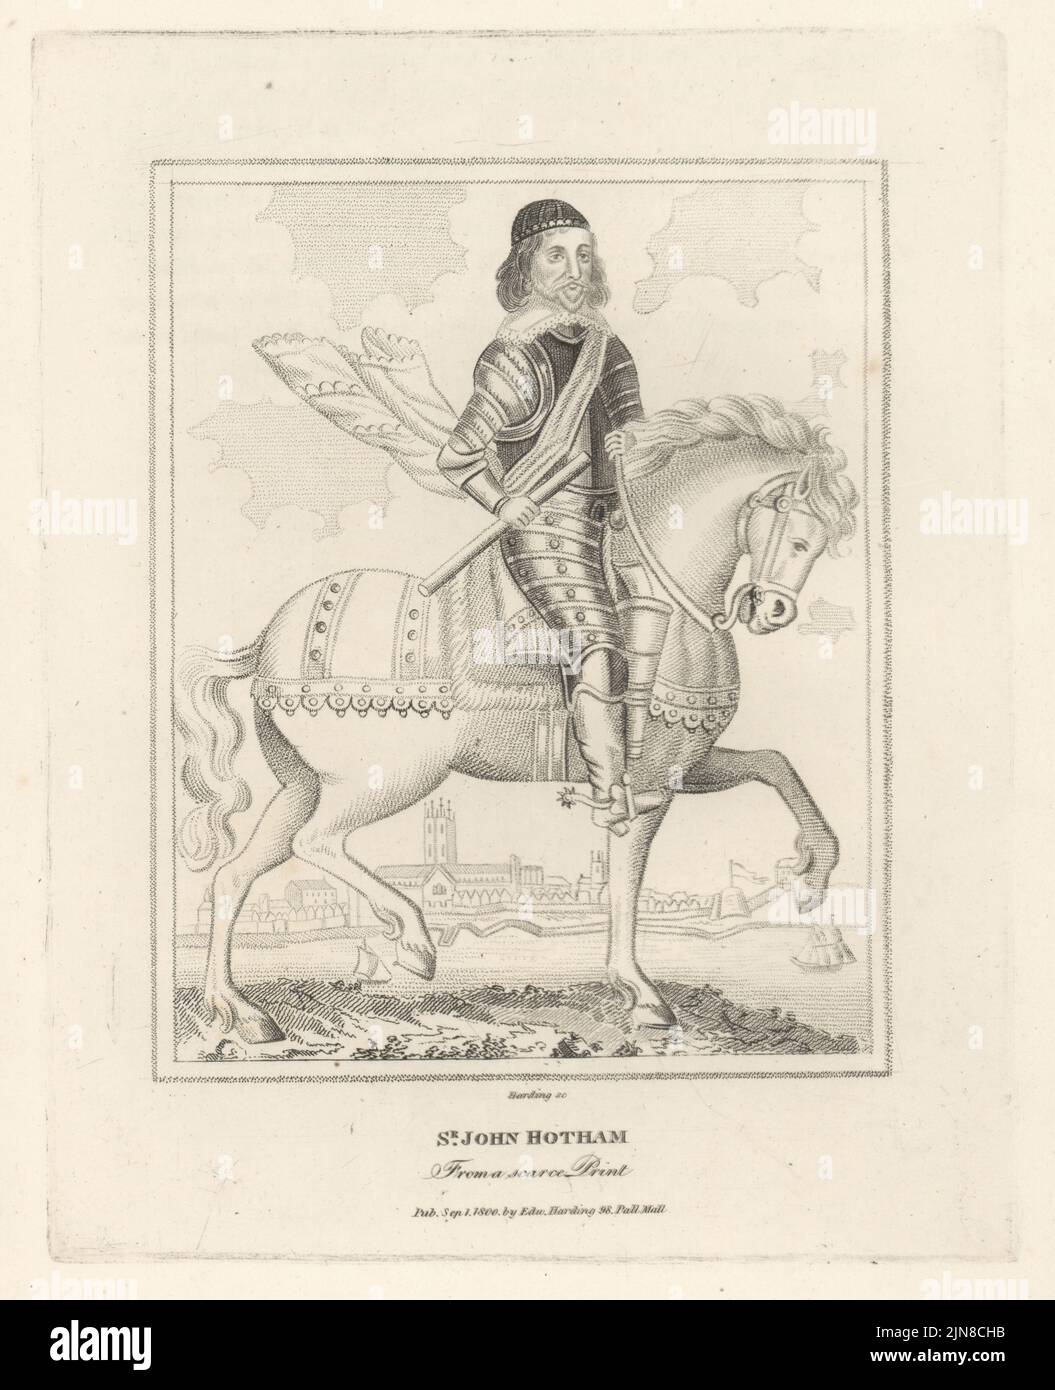 Sir John Hotham, 1st Baronet of Scorborough Hall, Yorkshire, c.1589-1645. Governor of Hull, Parliamentary soldier in the English Civil War, executed for treason. In cap, suit of plate armour, boots with spurs, holding a baton, mounted on a horse with pistol holster. View of Hull from the Humber with Holy Trinity Church (now Hull Minster) and the Citadel (fortress). Copperplate engraving by Edward Harding from John Adolphus’ The British Cabinet, containing Portraits of Illustrious Personages, printed by T. Bensley for E. Harding, 98 Pall Mall, London, 1799. Stock Photo